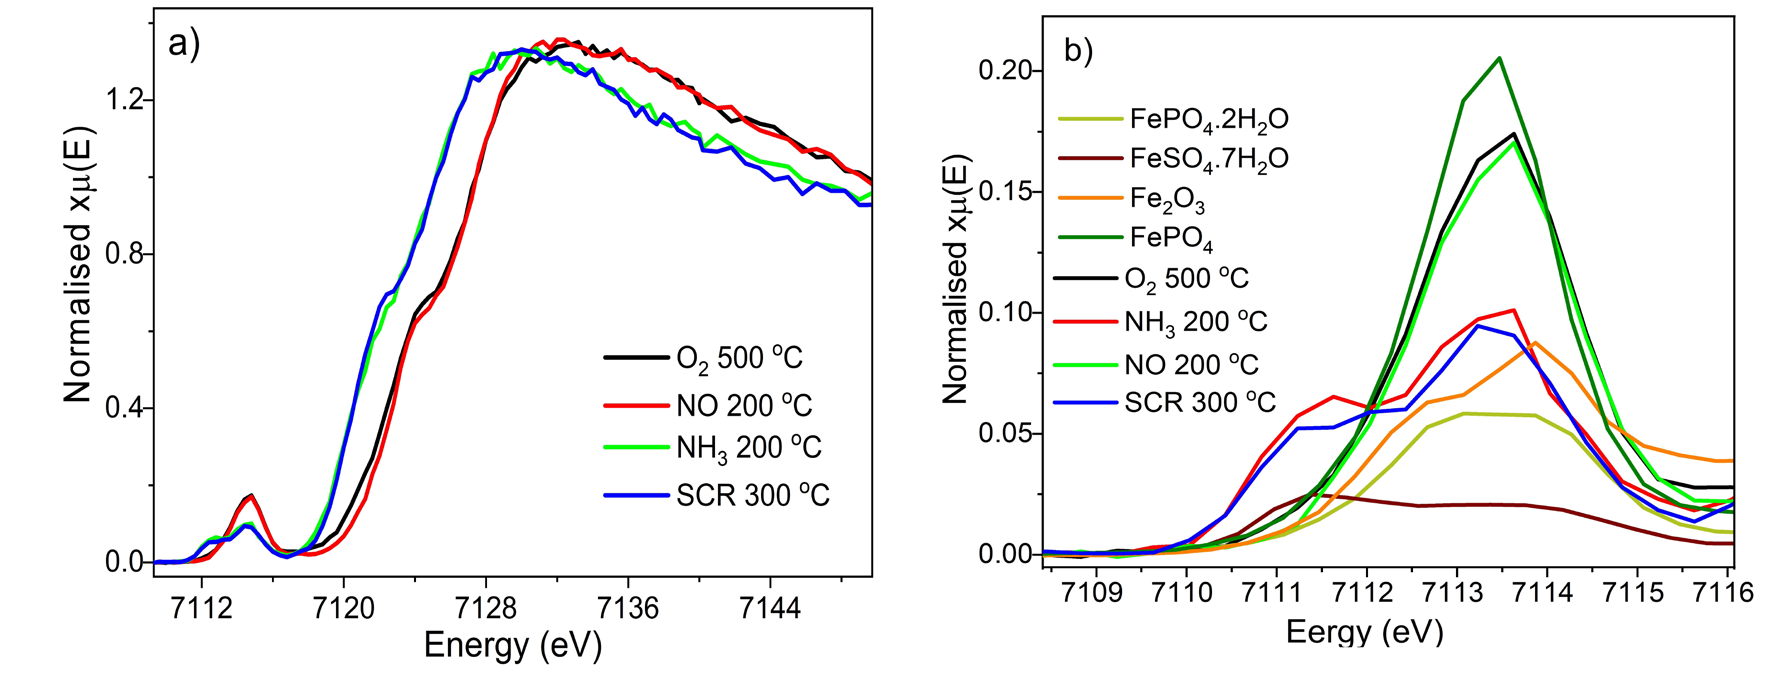 Figure 2: Fe K-edge HERFD-XANES spectra collected for Fe/H-ZSM-5 after activation in 20 % O<sub>2</sub>/He (500 °C), under 0.1 % NO/He and 1 % NH3/He (200 °C), and under SCR conditions (5 % O<sub>2</sub>, 5000 ppm<br/>NO, 5000 ppm NH3 in He, 300 °C); (a) General features for the catalyst spectra, and (b) comparison of the pre-edge features for the Fe reference model compounds indicated in the figure and the catalyst.